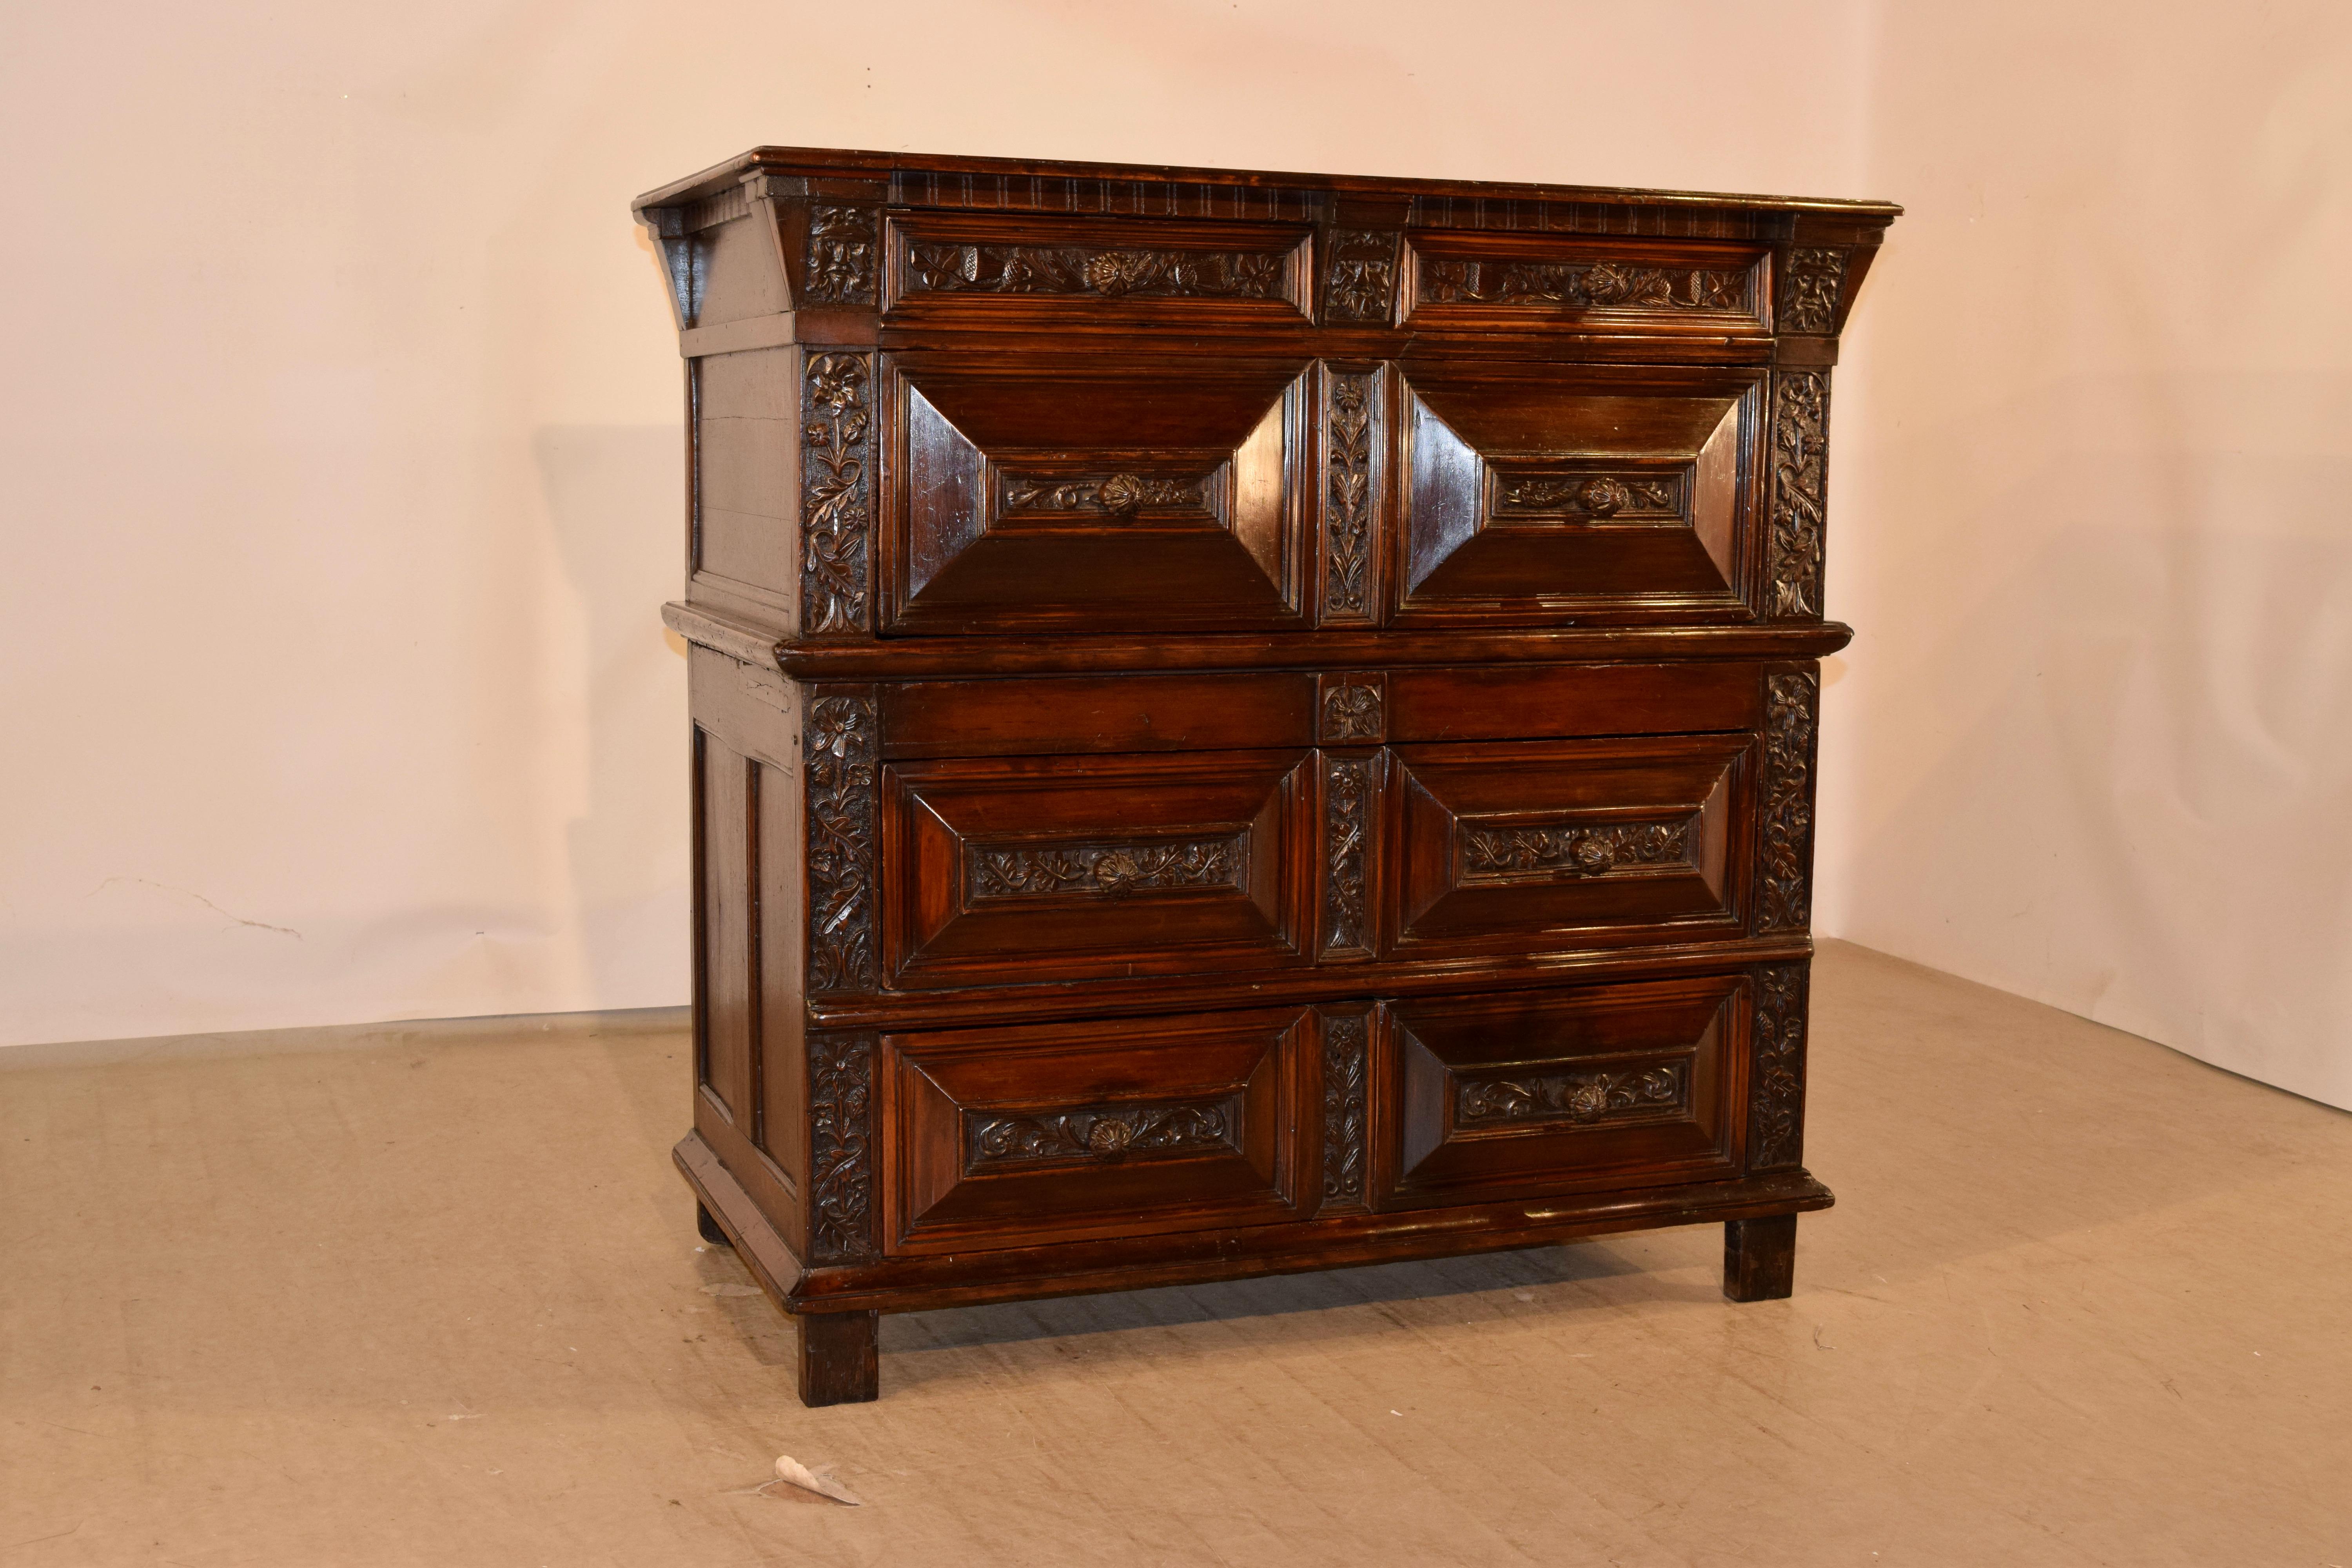 17th century carved two piece chest of drawers from Scotland made from walnut and rosewood. The top is banded and has a beveled edge surrounding a four board top. The sides are hand paneled, and the front of the case contains two small drawers over